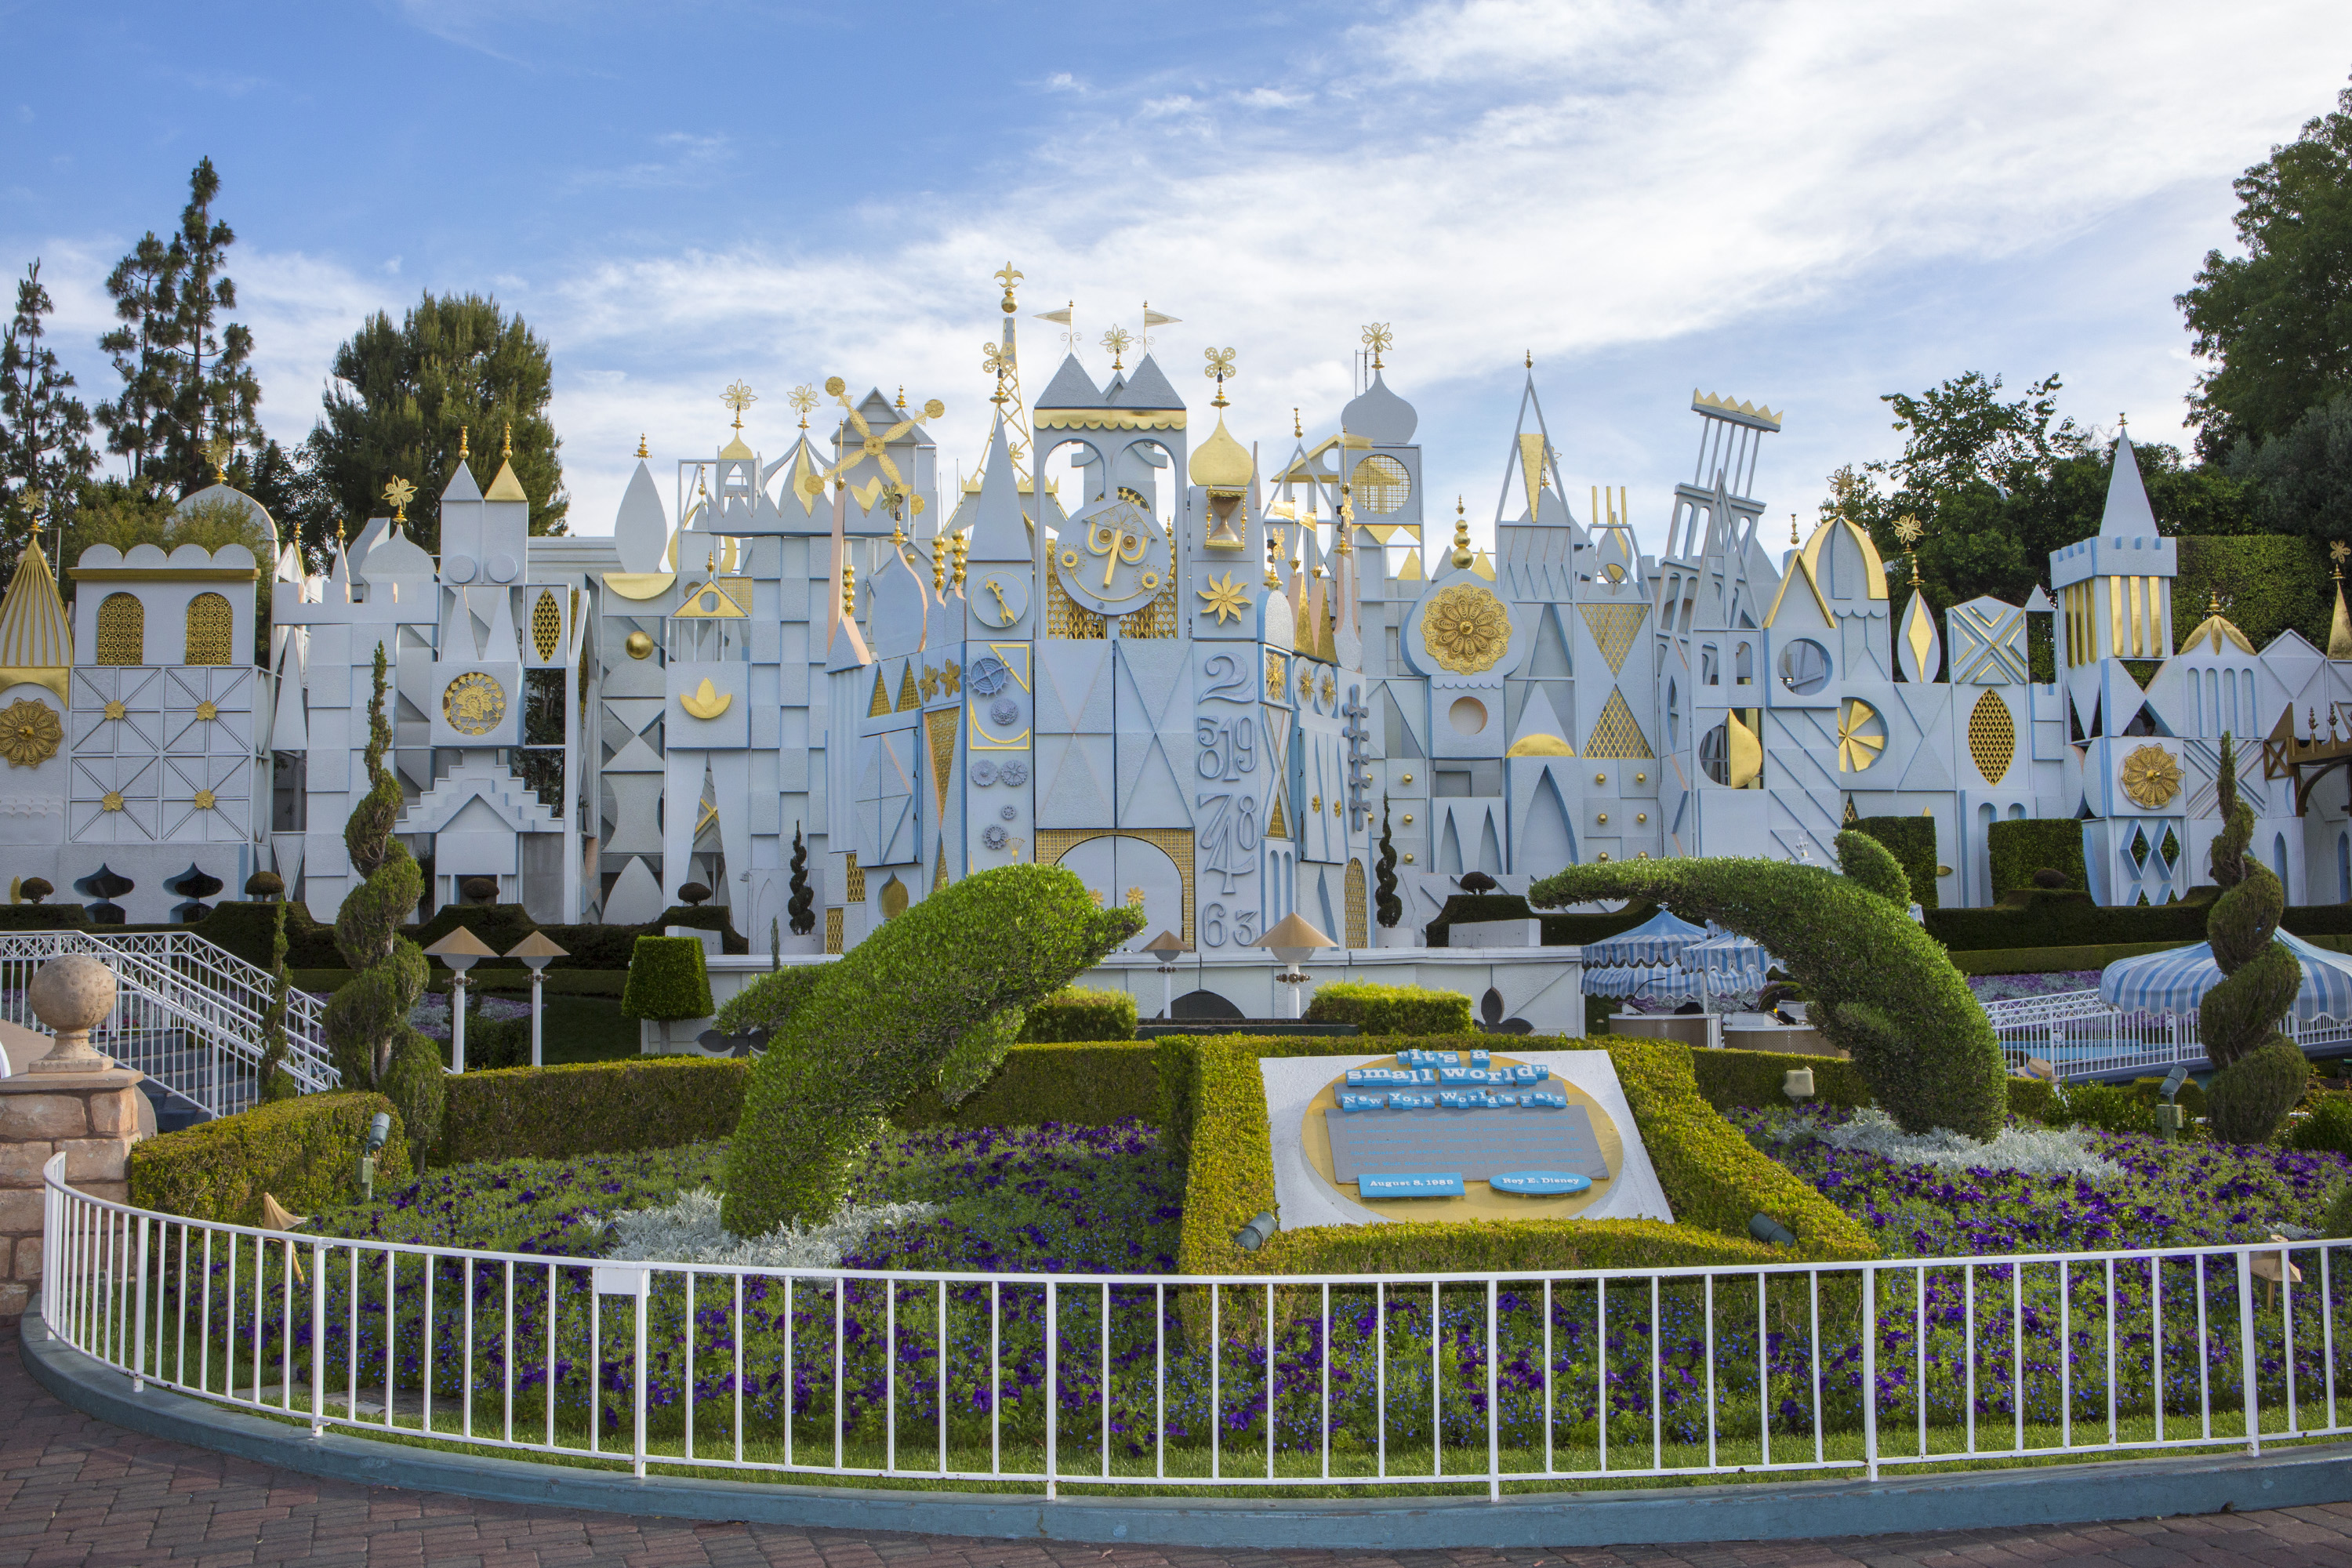 How to Make the Most of the Disneyland Magic for the Little Ones in Your Group